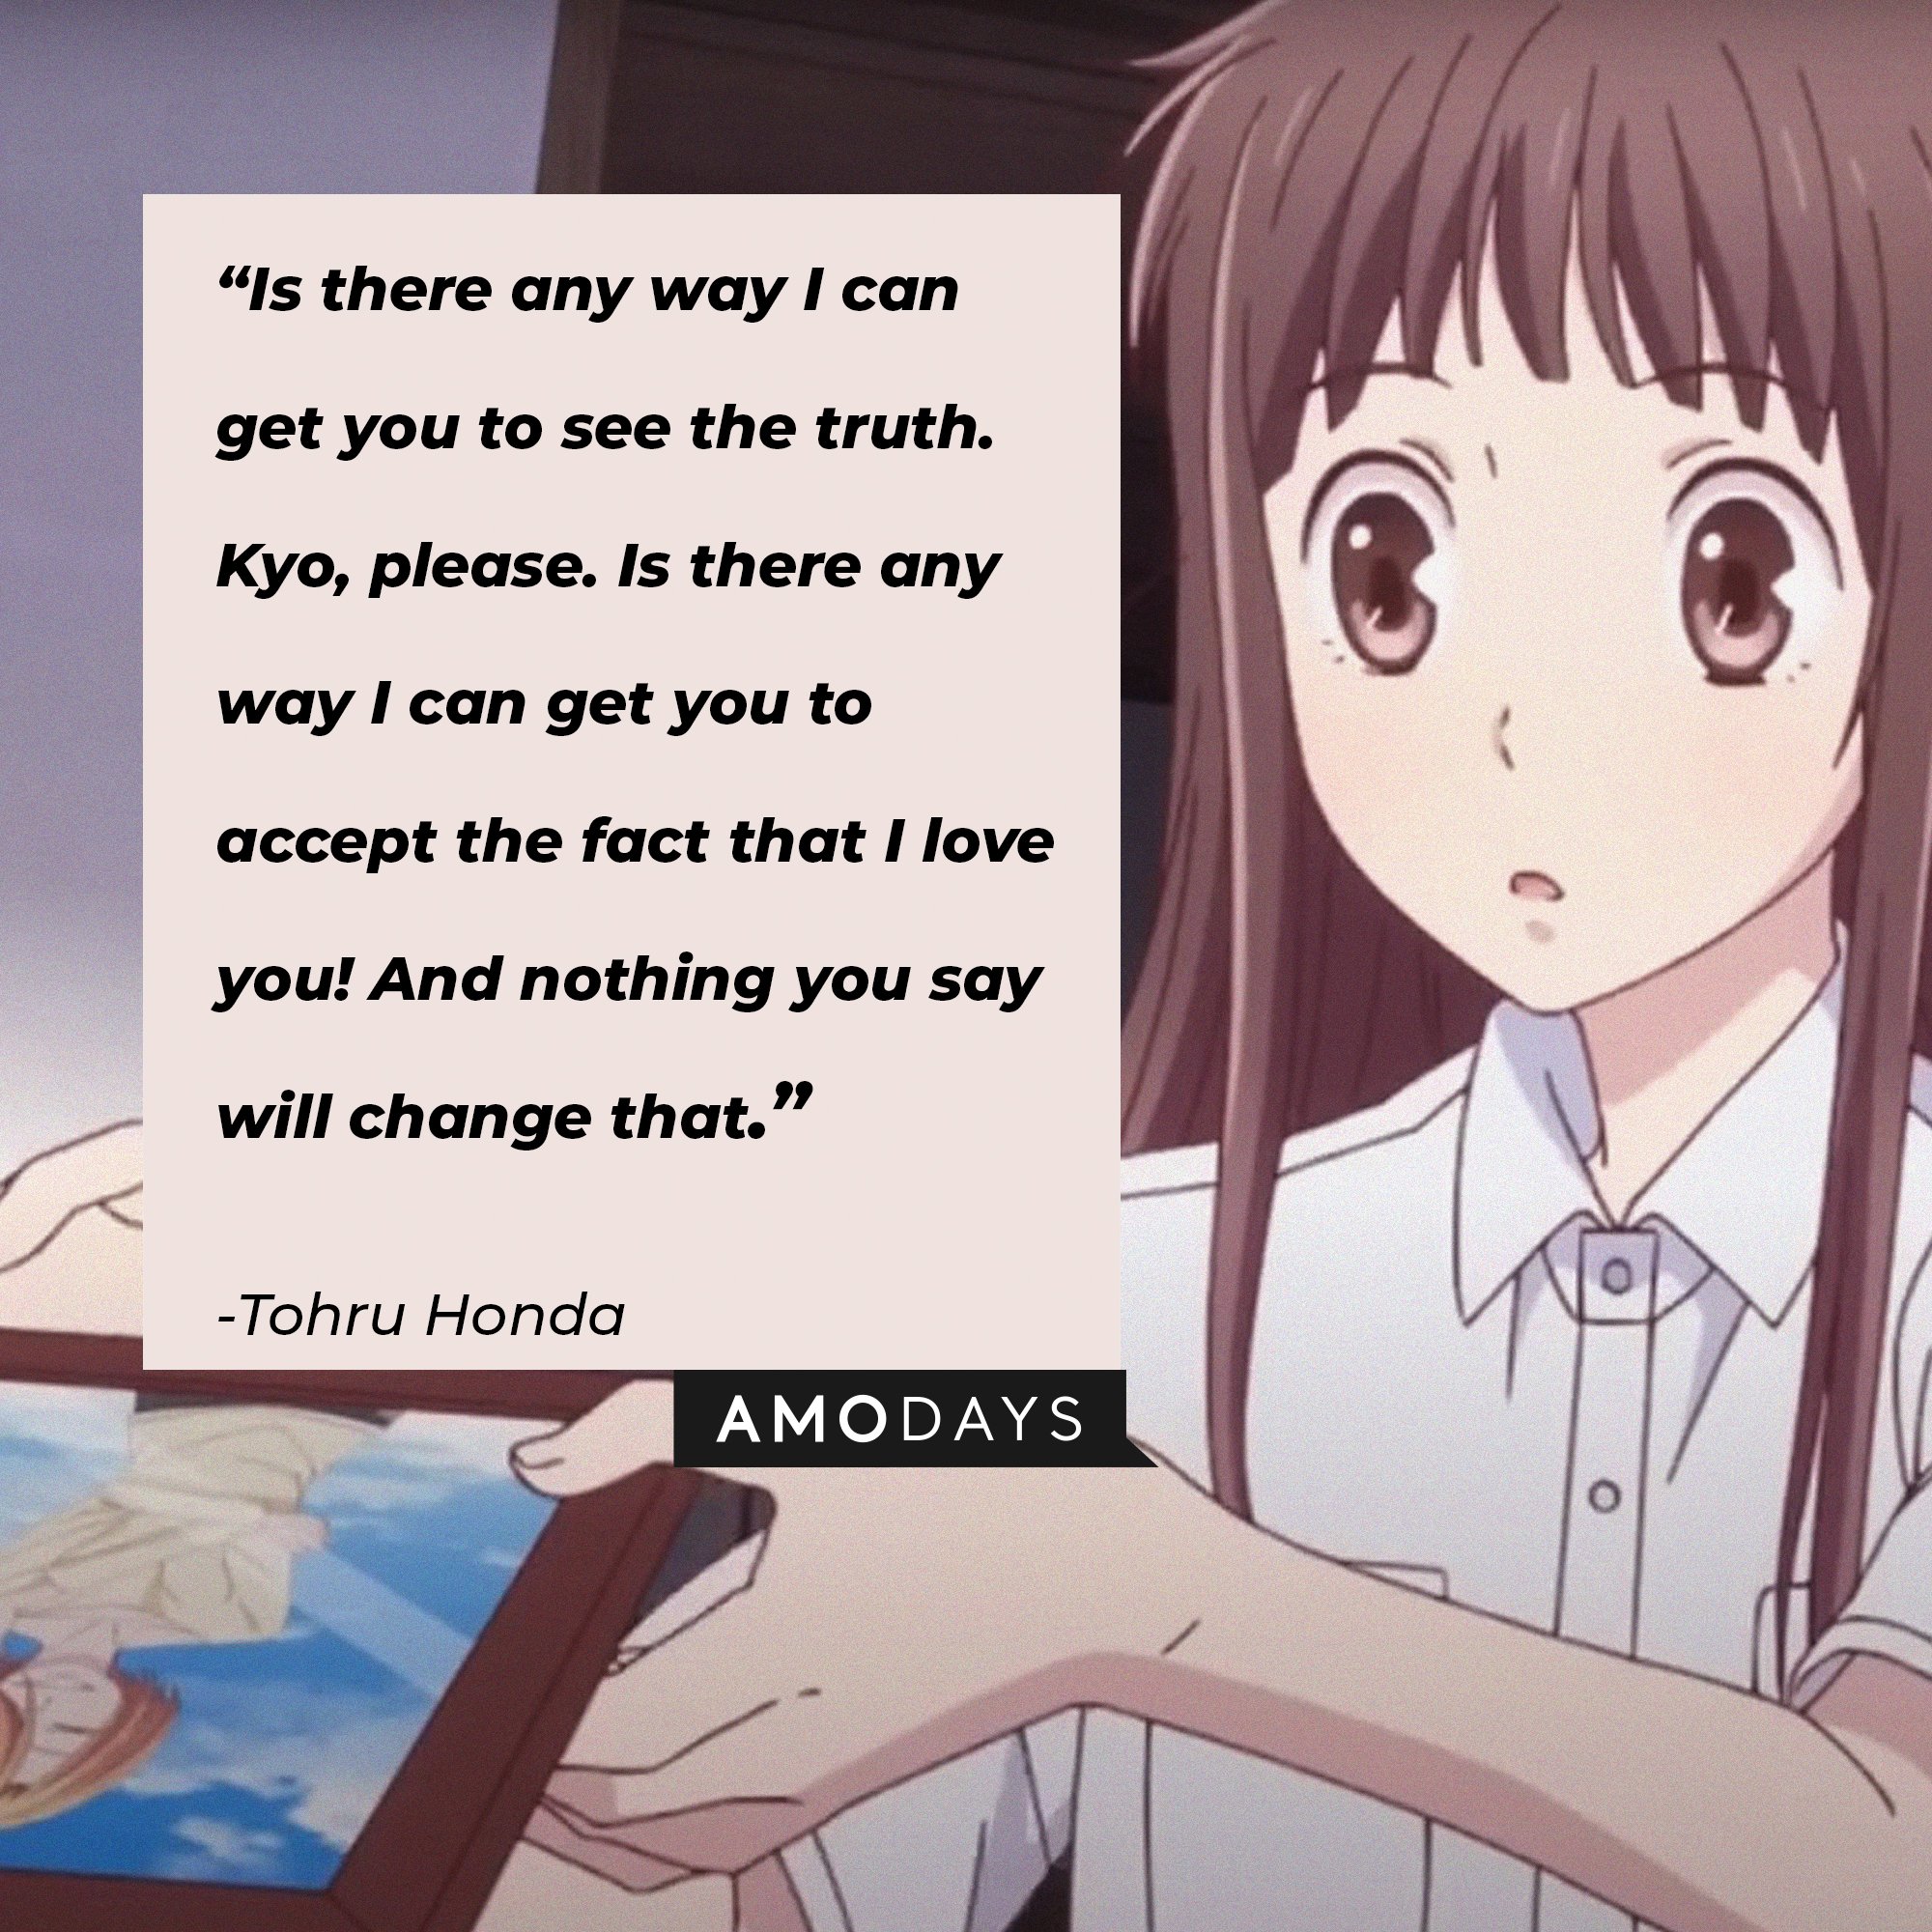  Tohru Honda’s quote: “Is there any way I can get you to see the truth. Kyo, please. Is there any way I can get you to accept the fact that I love you! And nothing you say will change that.” | Image: AmoDays